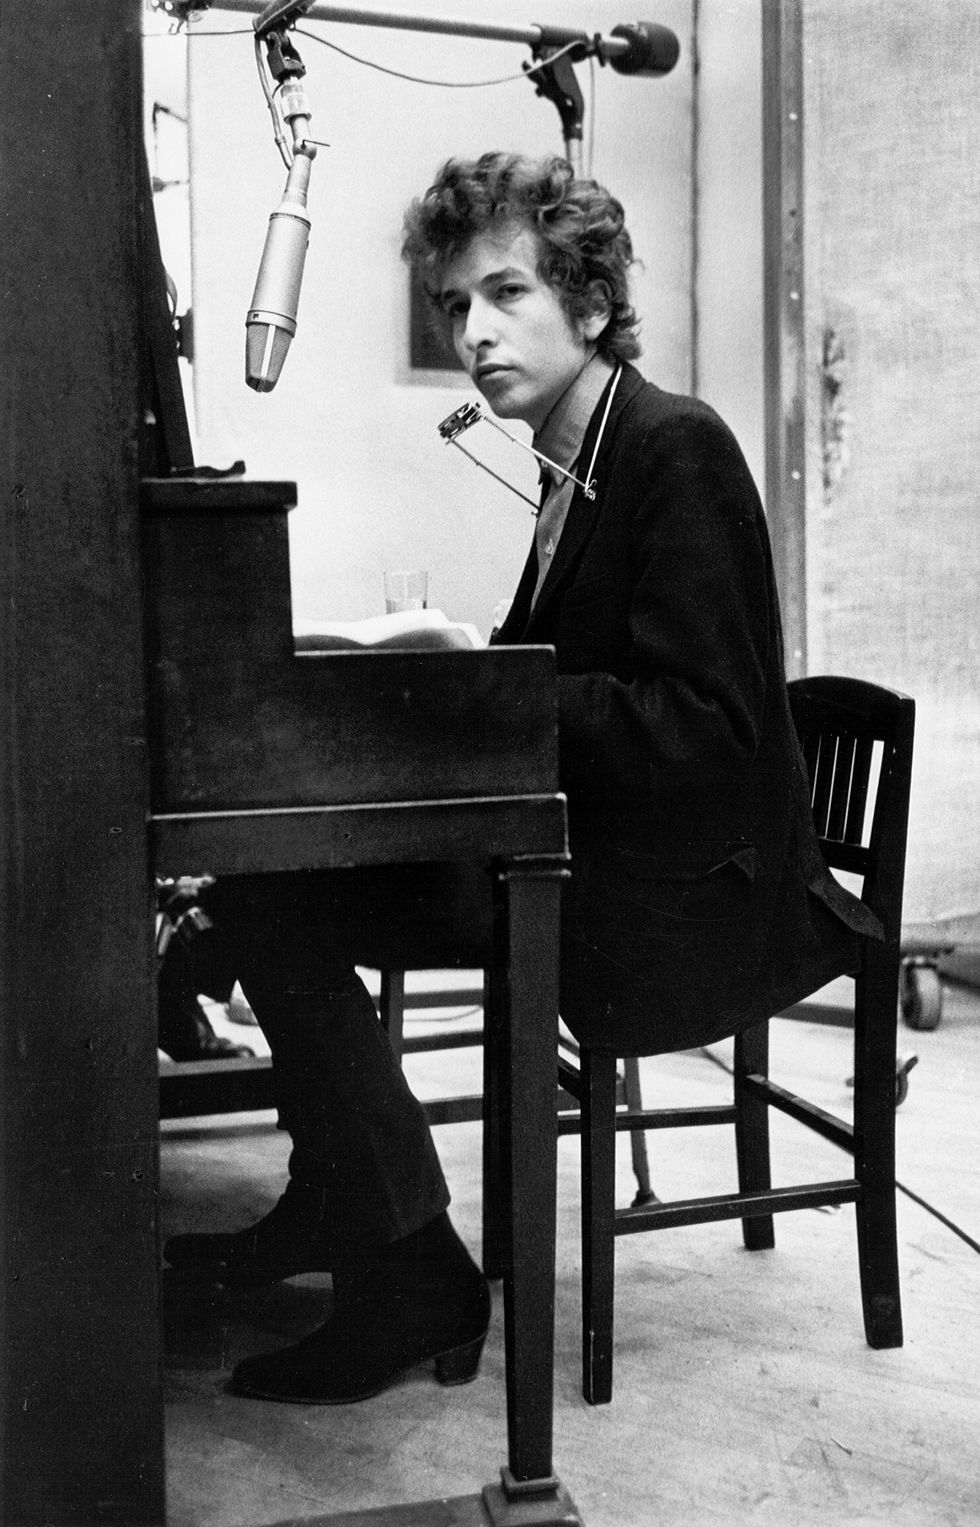 Bob Dylan plays piano with a harmonica around his neck while recording his album 'Highway 61 Revisited' on January 13-15, 1965, in Columbia's Studio A in New York City